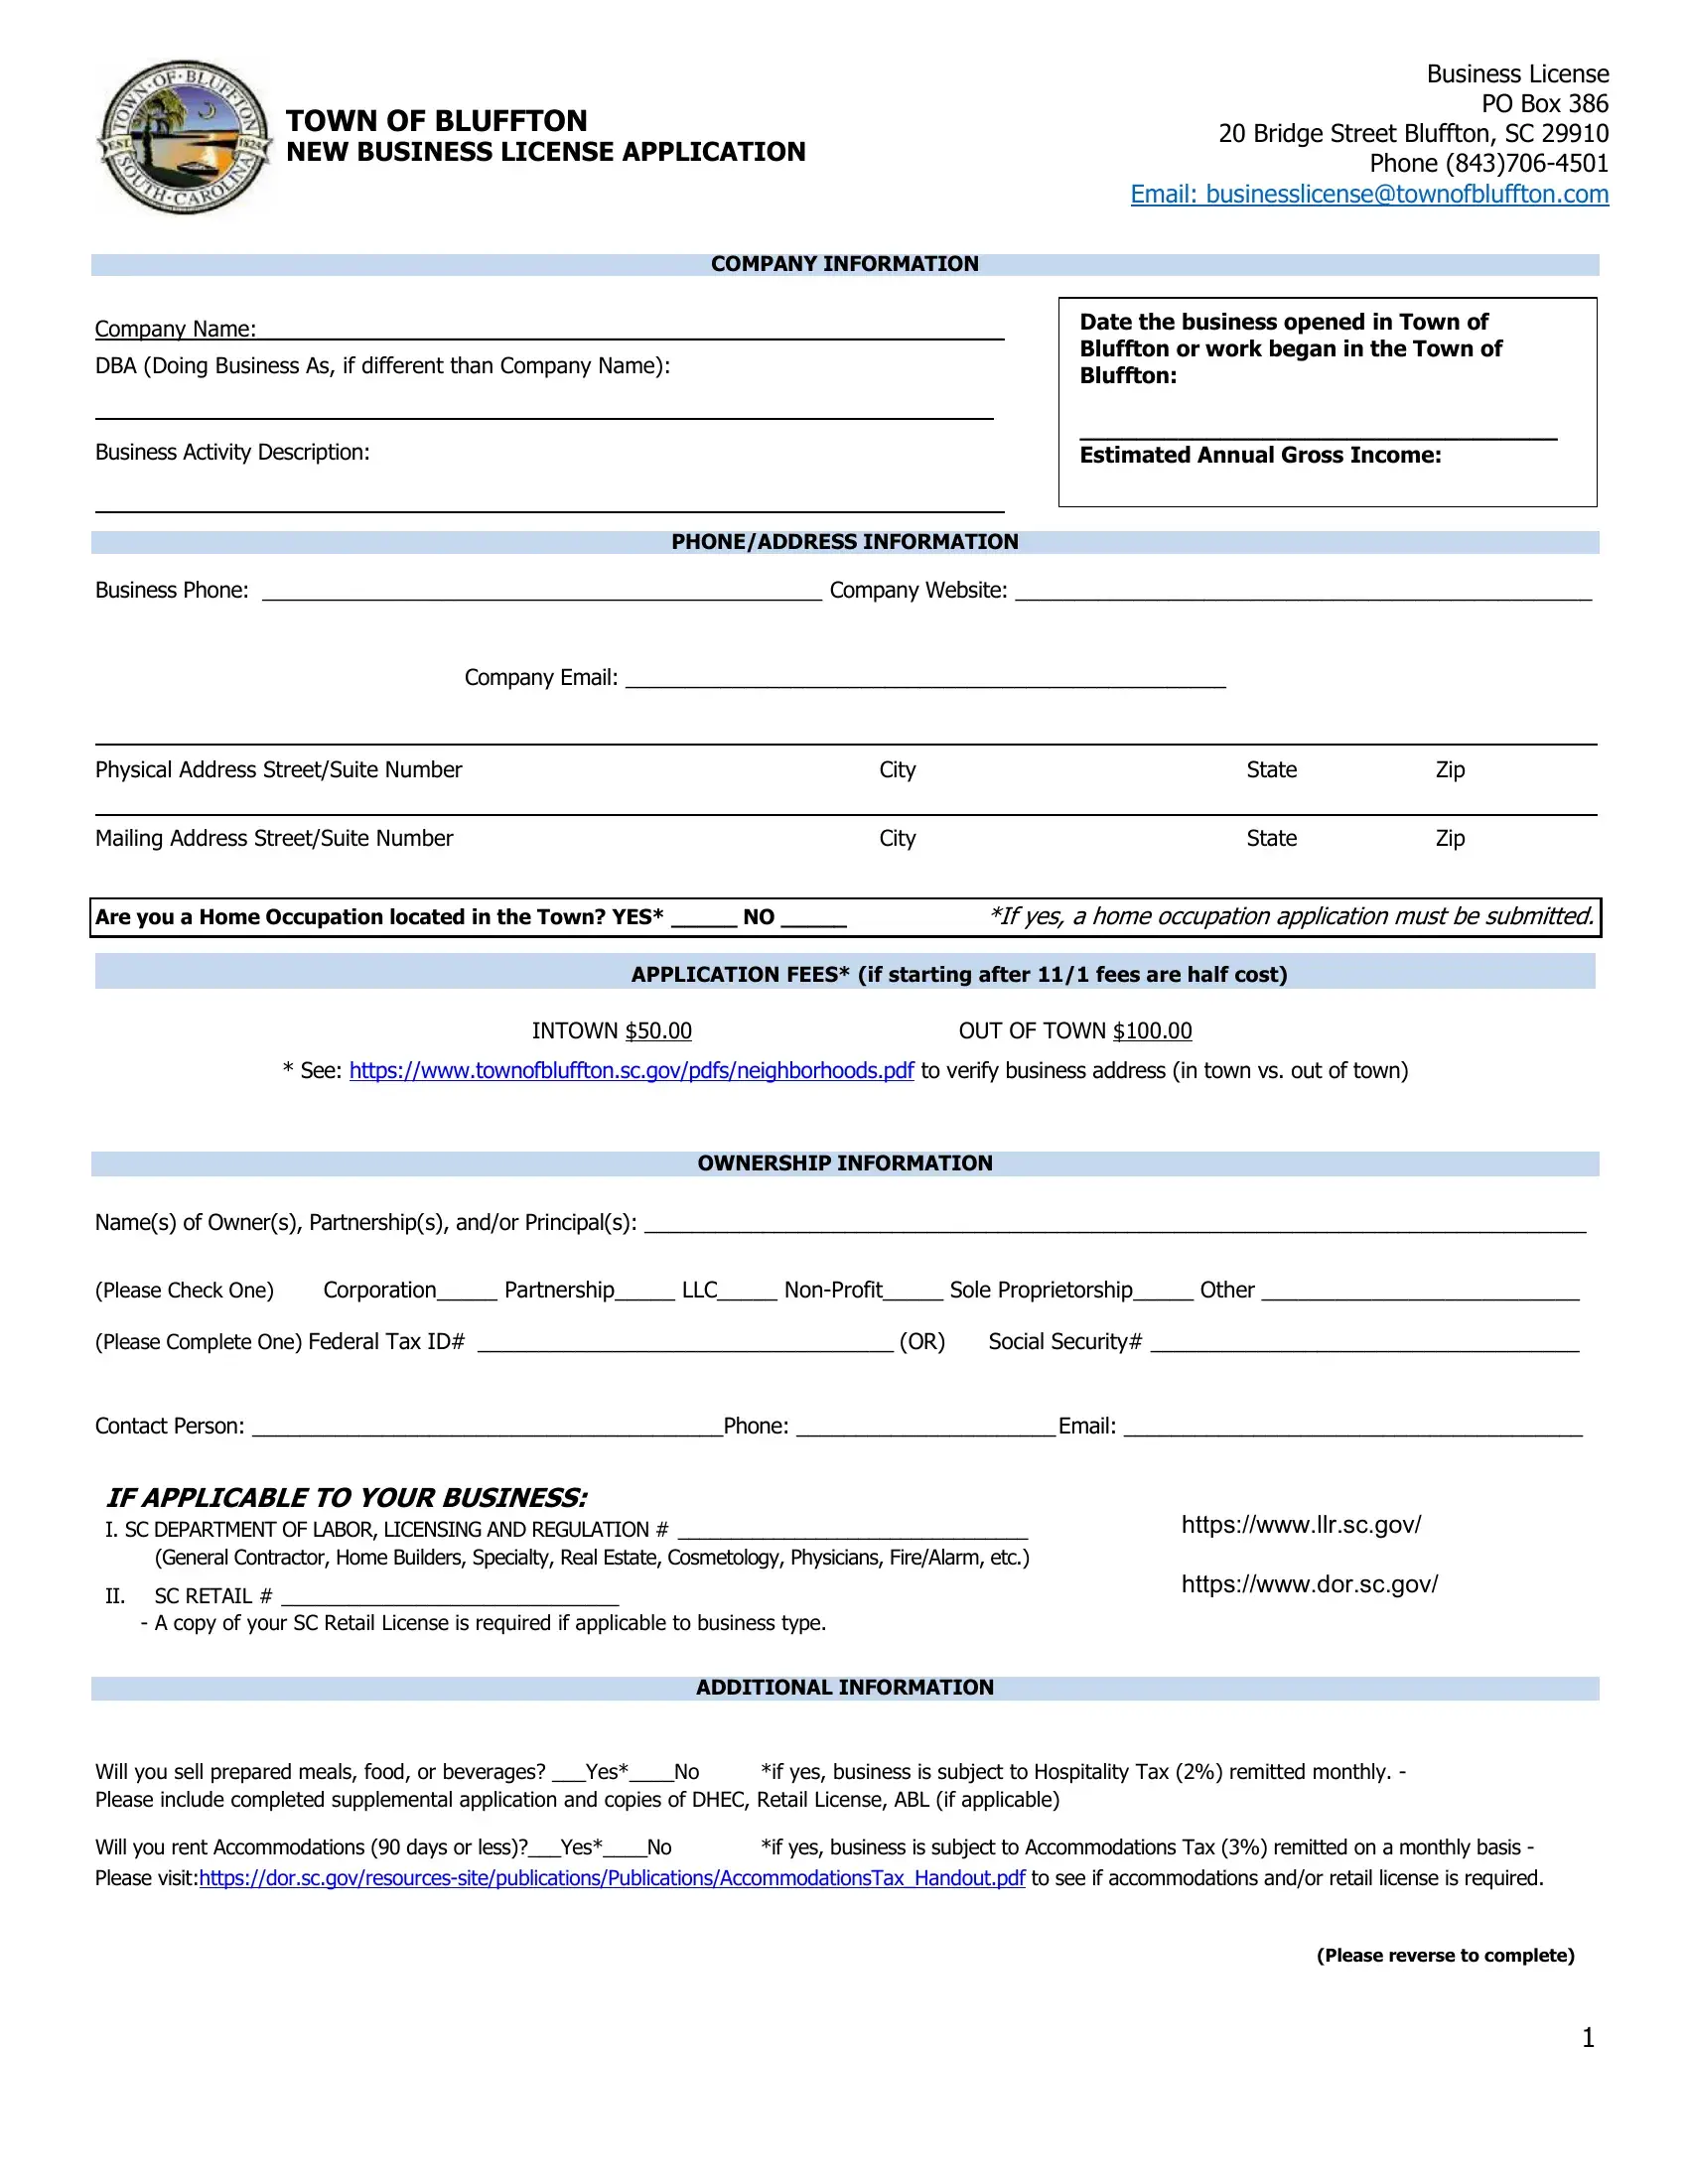 Business License Application Form Preview